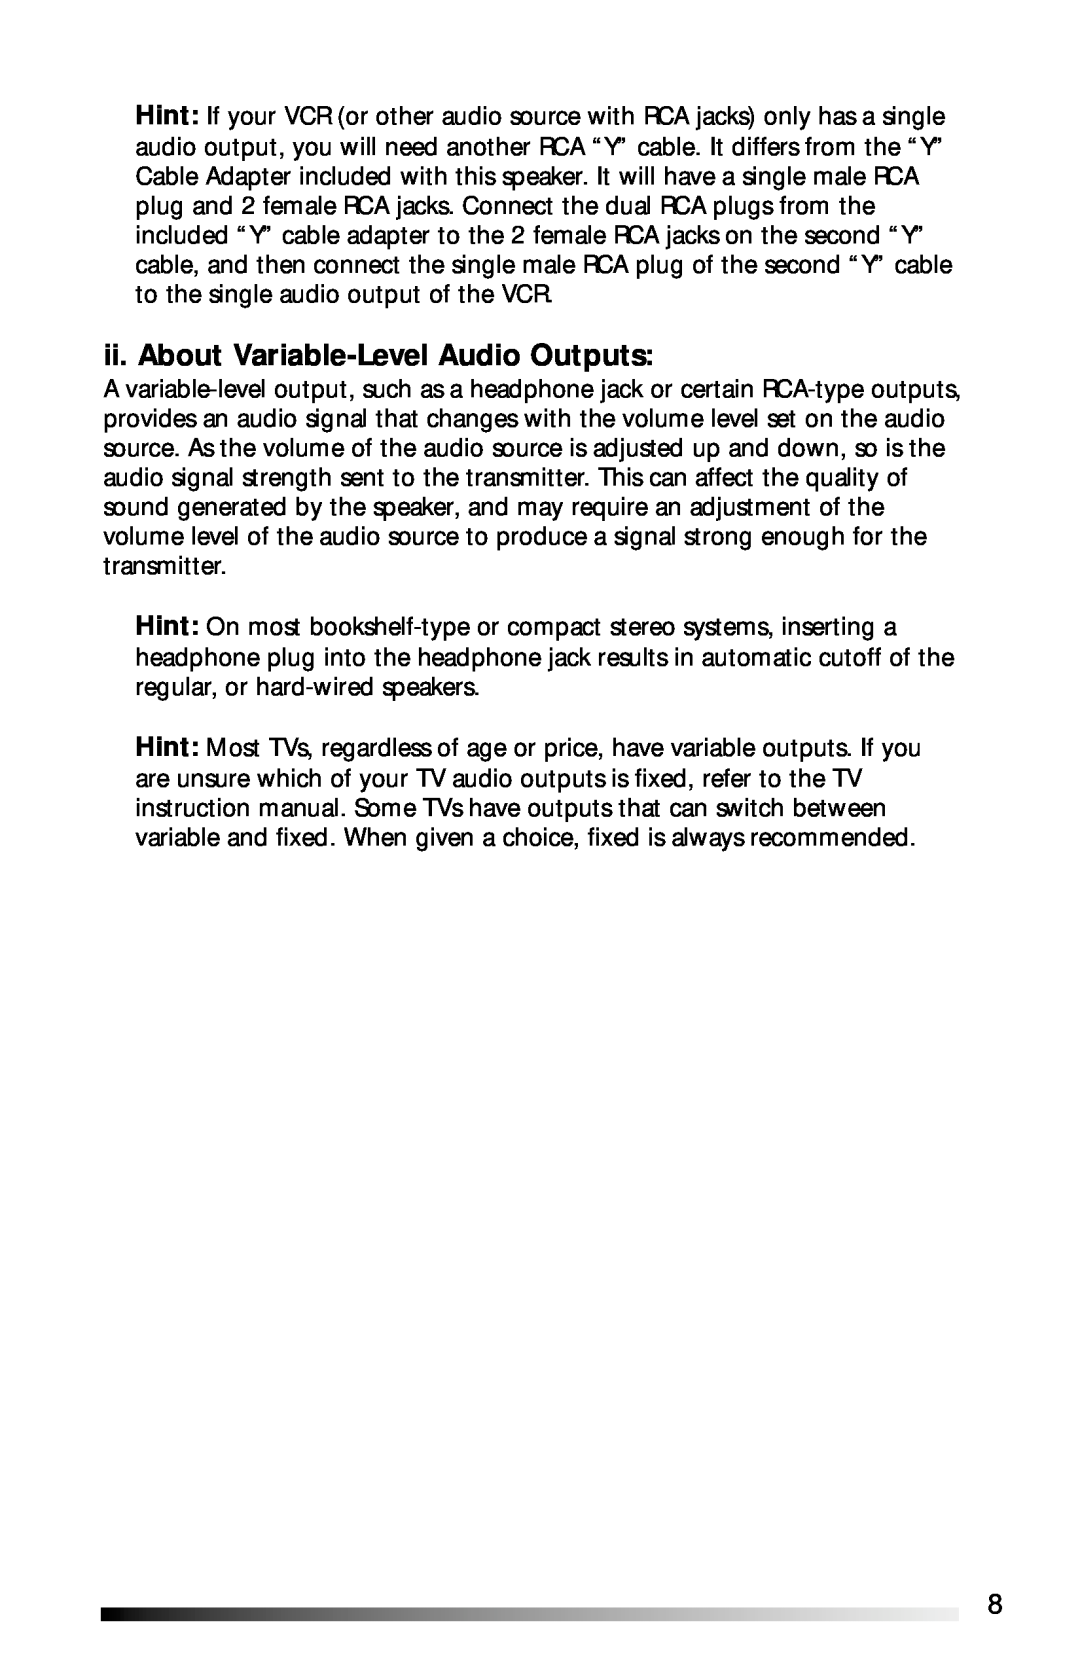 Recoton/Advent AW811 operation manual ii. About Variable-LevelAudio Outputs 